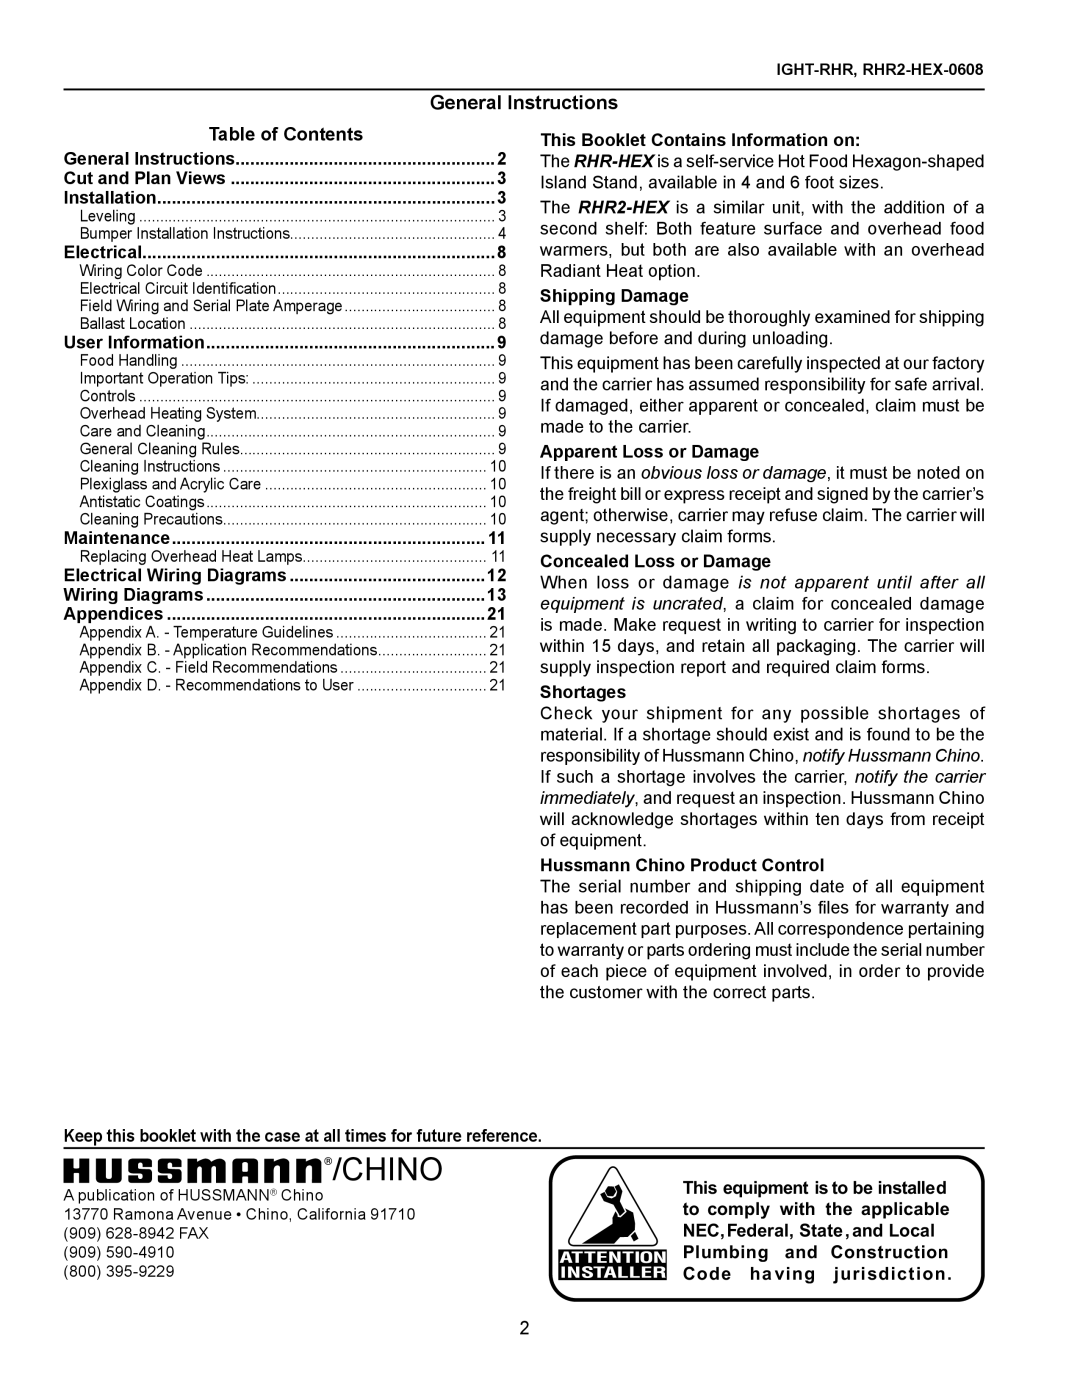 hussman RHR2-HEX General Instructions, Table of Contents, Chino, This Booklet Contains Information on, Shipping Damage 